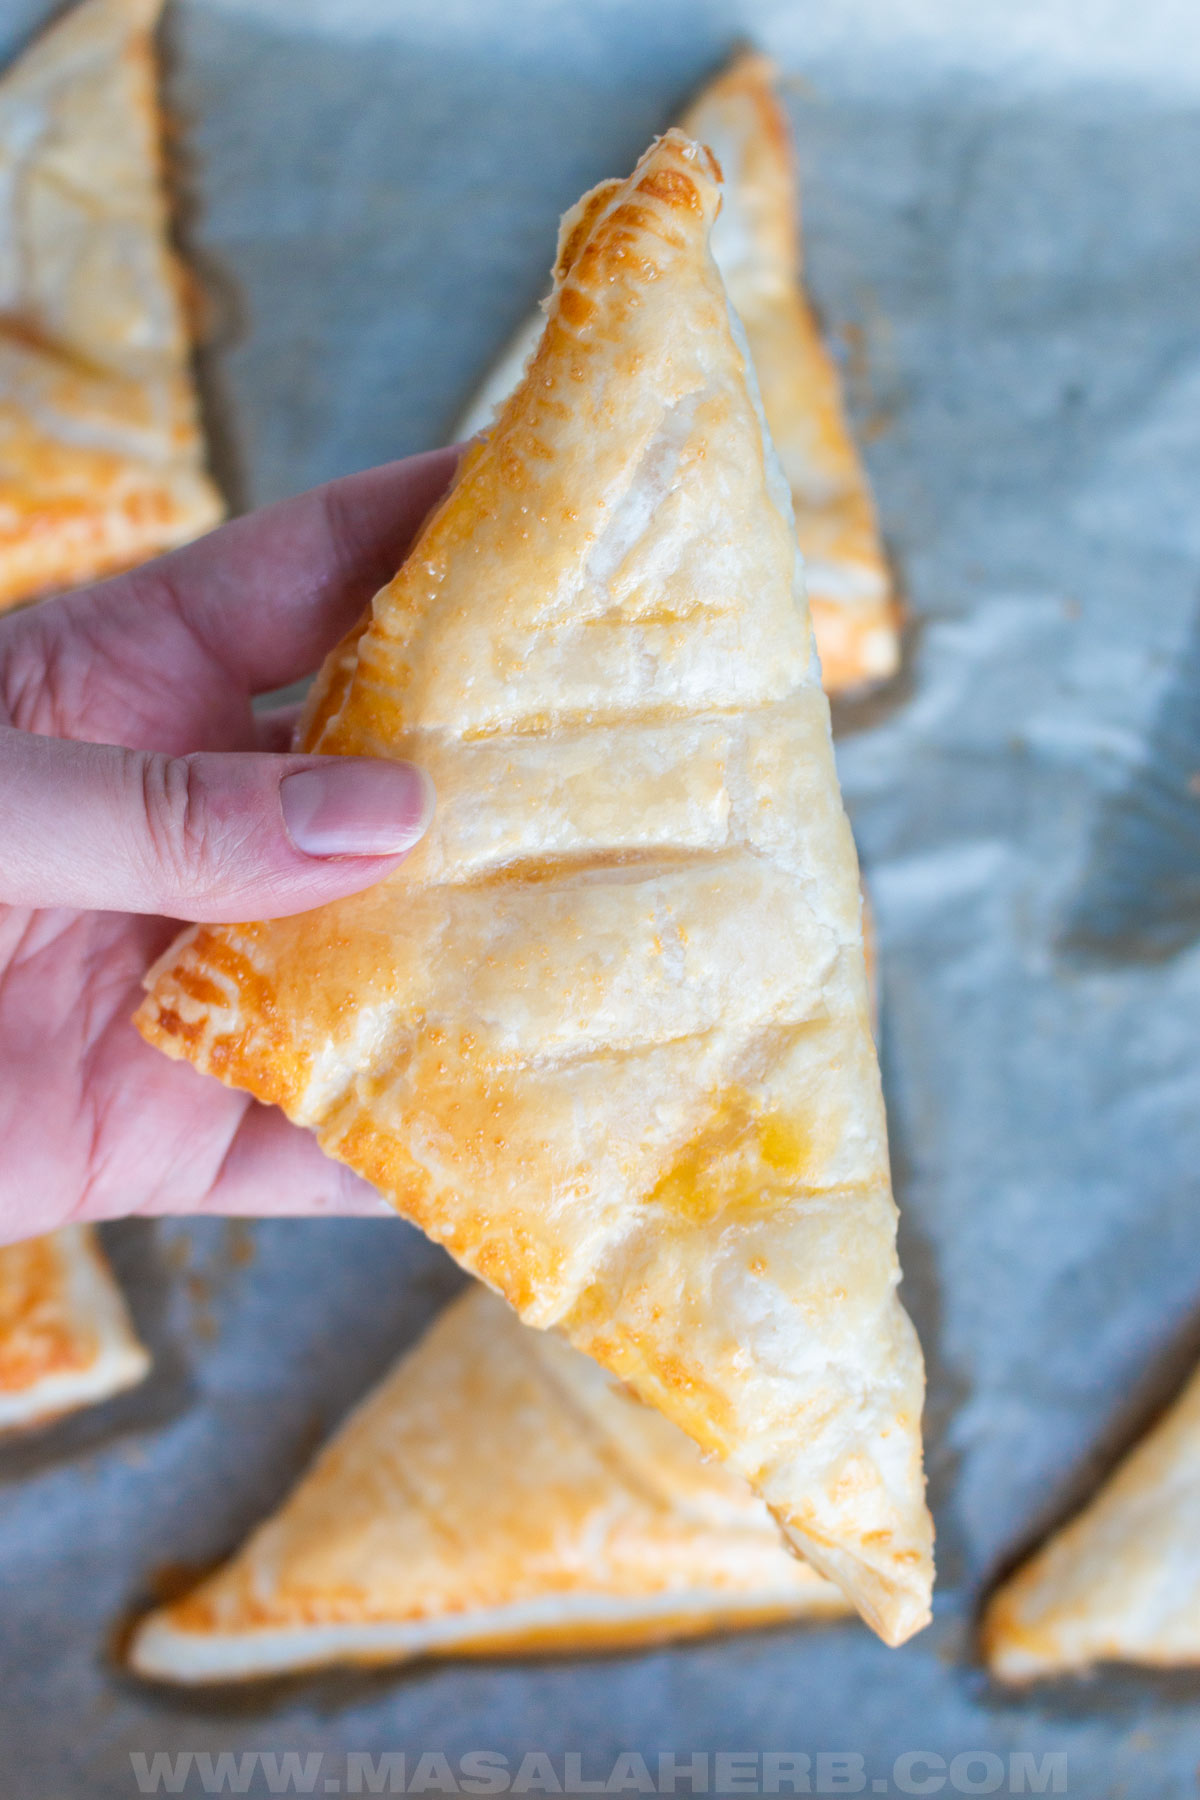 Danish triangle with puff pastry